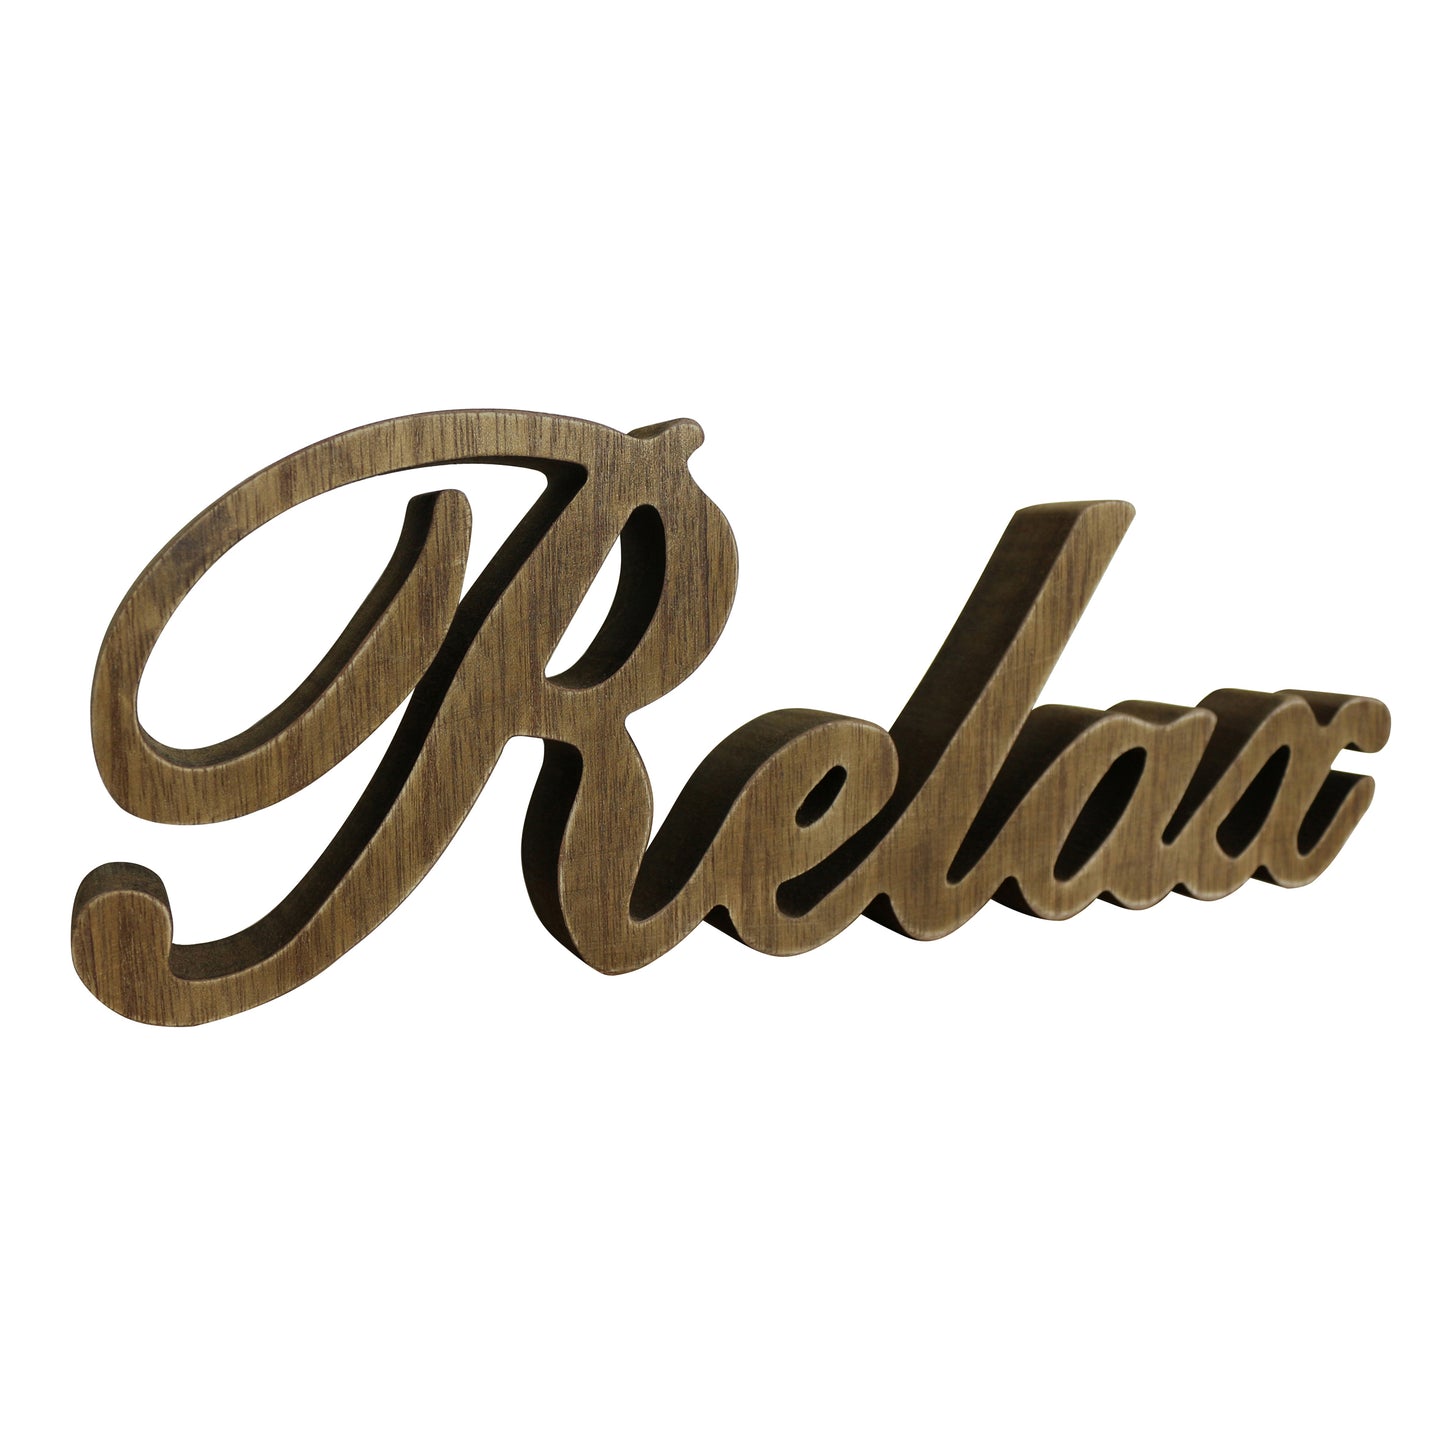 CVHOMEDECO. Rustic Vintage Distressed Wooden Words Sign Free Standing "Relax" Tabletop/Shelf/Home Wall/Office Decoration Art, 12 x 4.25 x 1 Inch